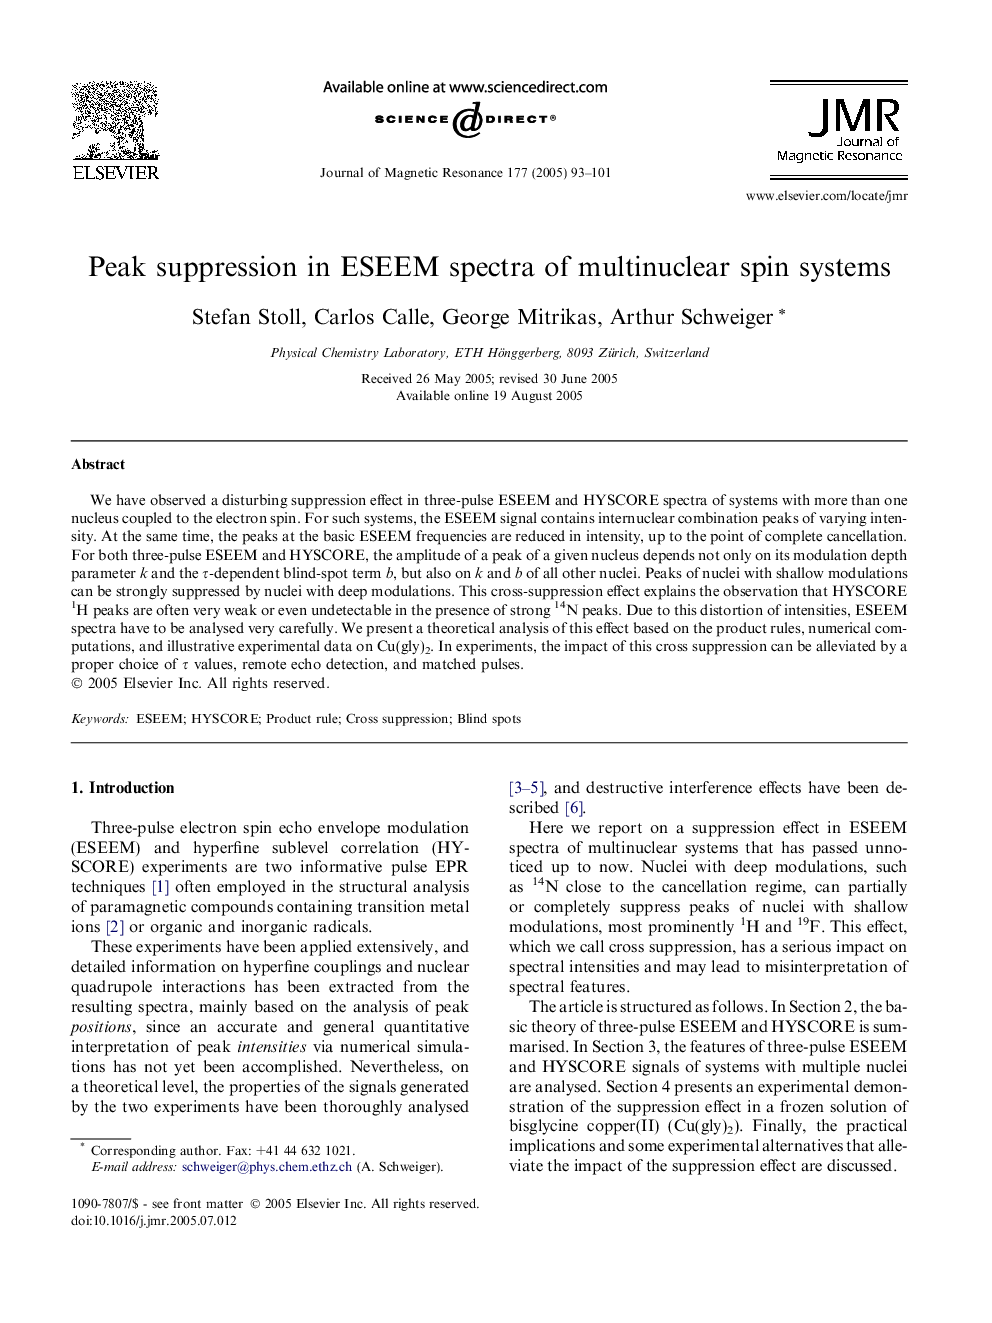 Peak suppression in ESEEM spectra of multinuclear spin systems